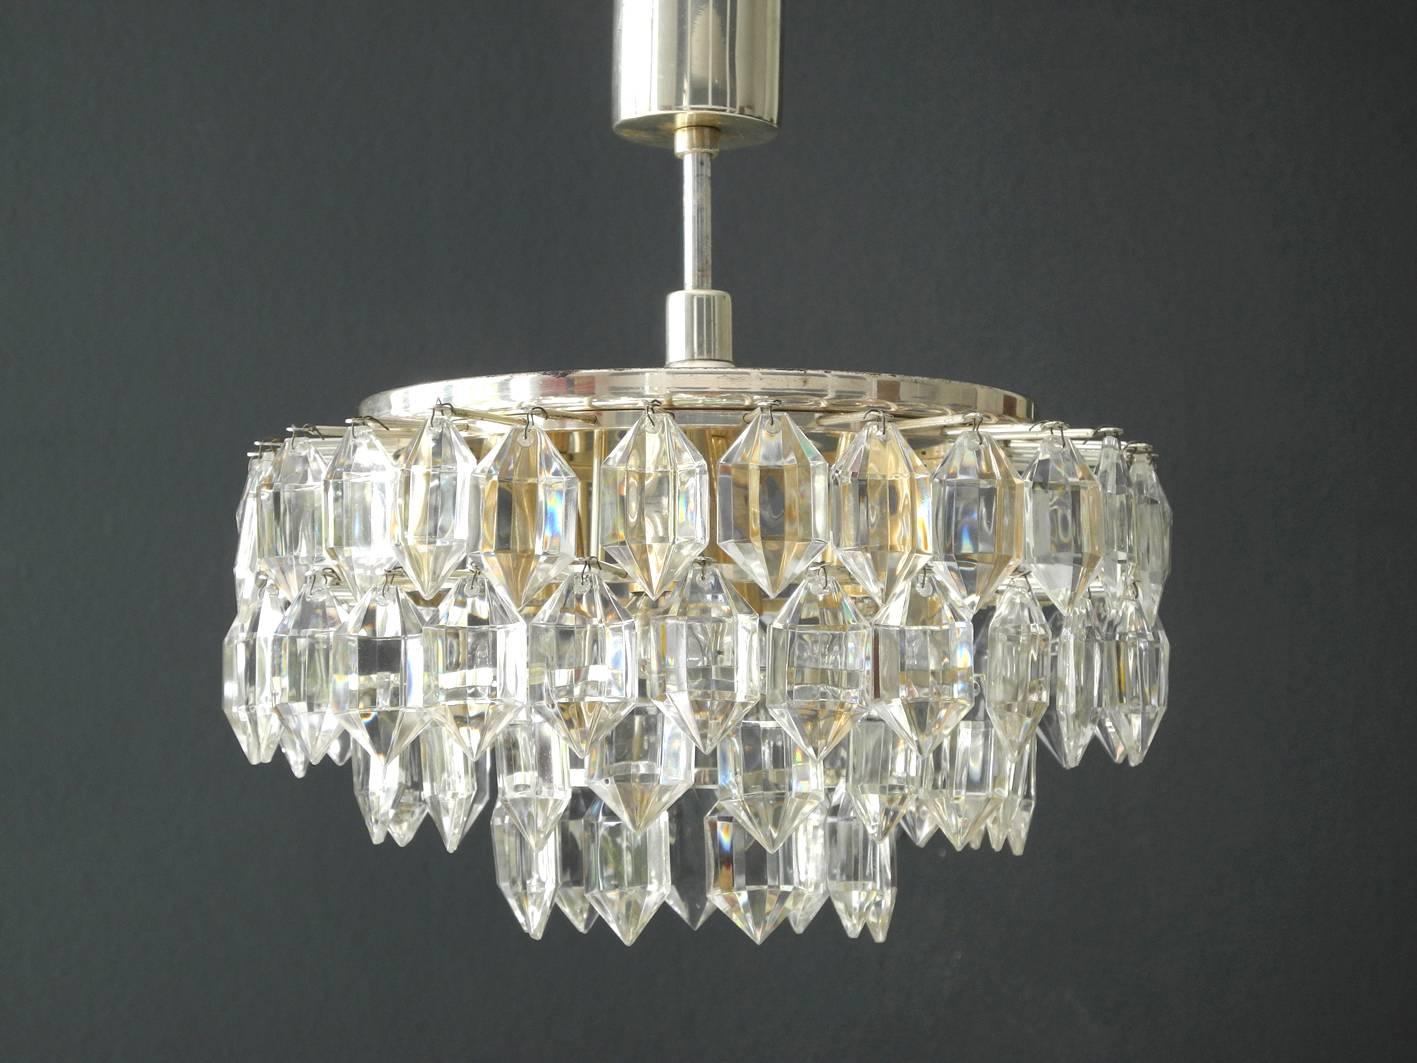 Beautiful original 1960s Bakalowits crystal small chandelier with silver-plated frame.
Very high quality lamp with faceted crystals.
Fantastic light, fits in all rooms.
Very nice warm glare-free light with seven E14 sockets.
Complete lamp